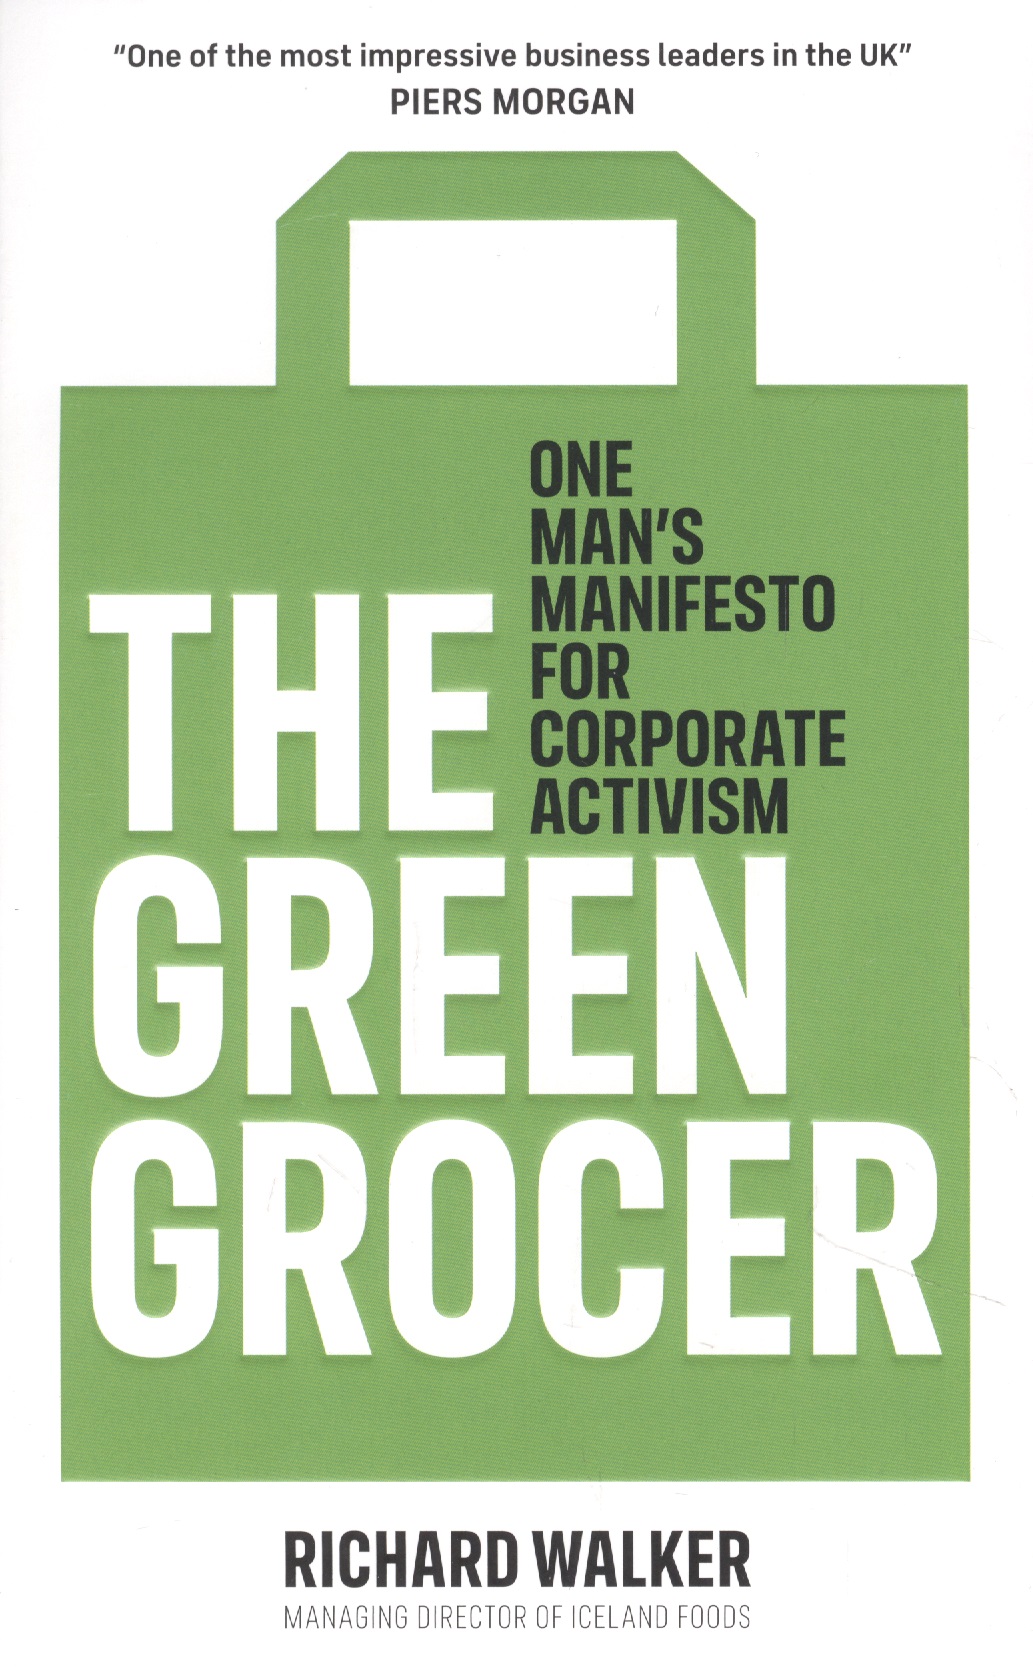 The Green Grocer. One Mans Manifesto for Corporate Activism